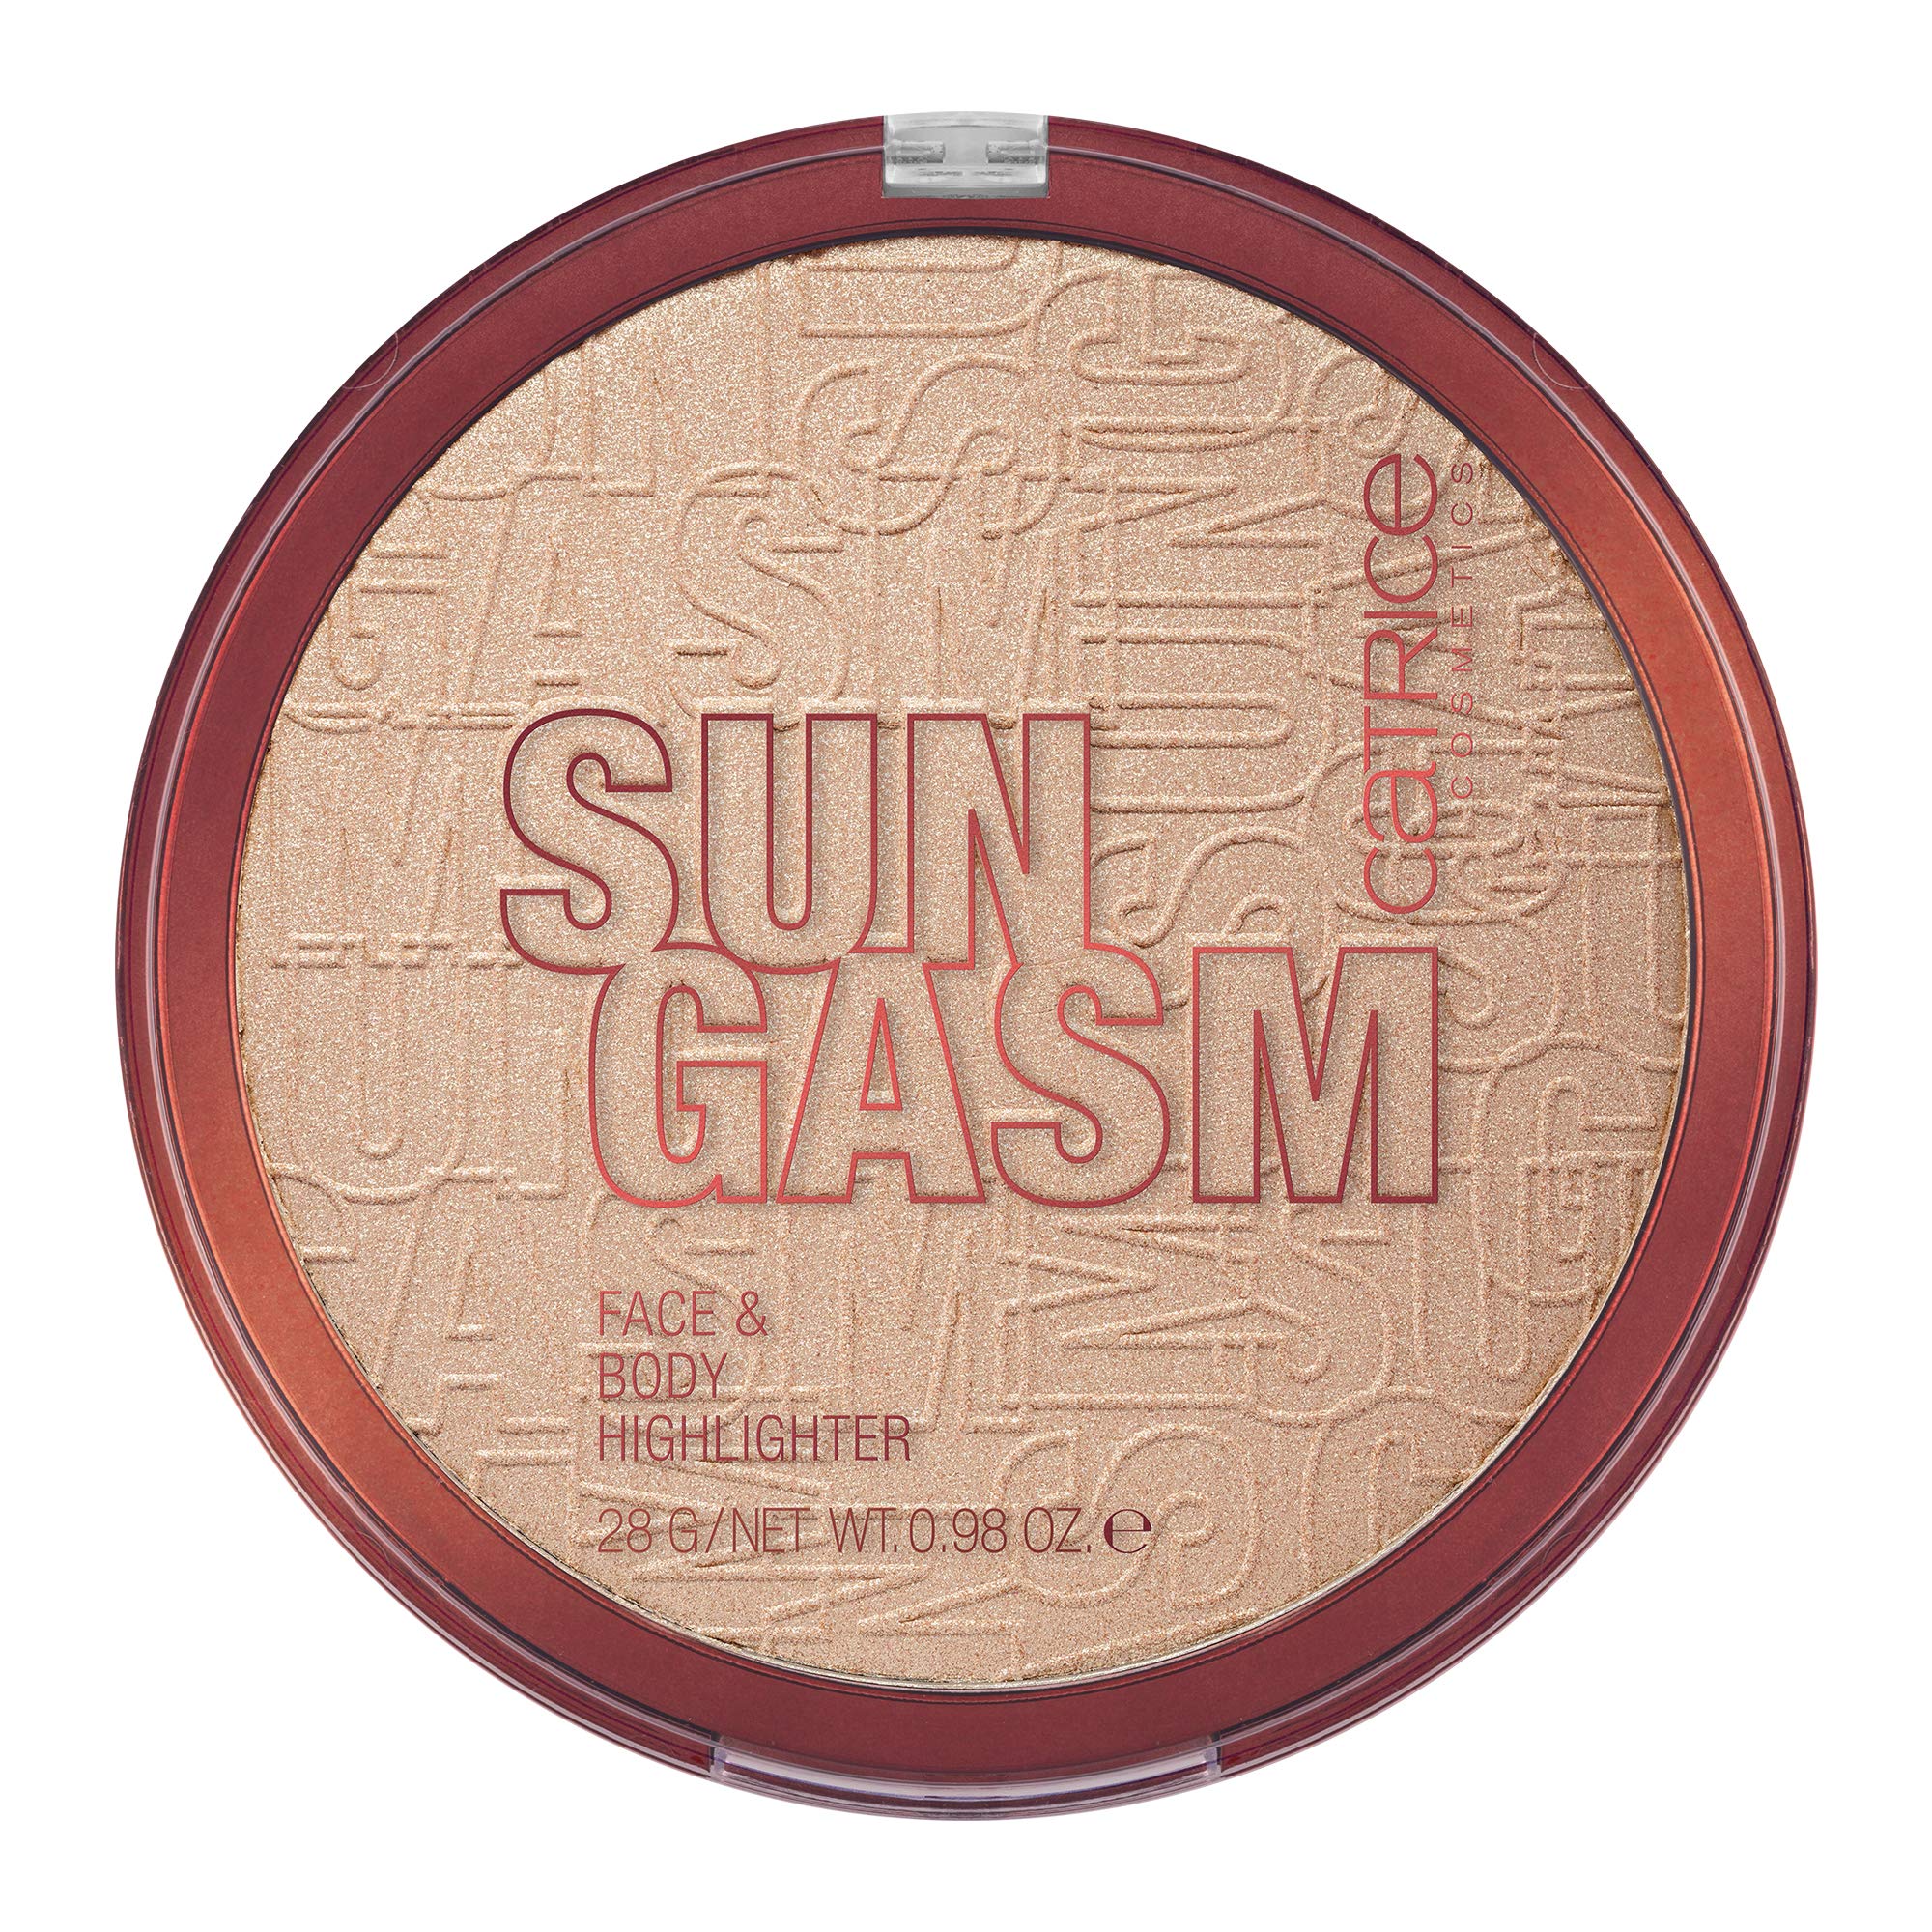 & Highlighter Body With Jumbo | Reflecting SUNGASM | Catrice Sized, Face Powder Light Silky Soft